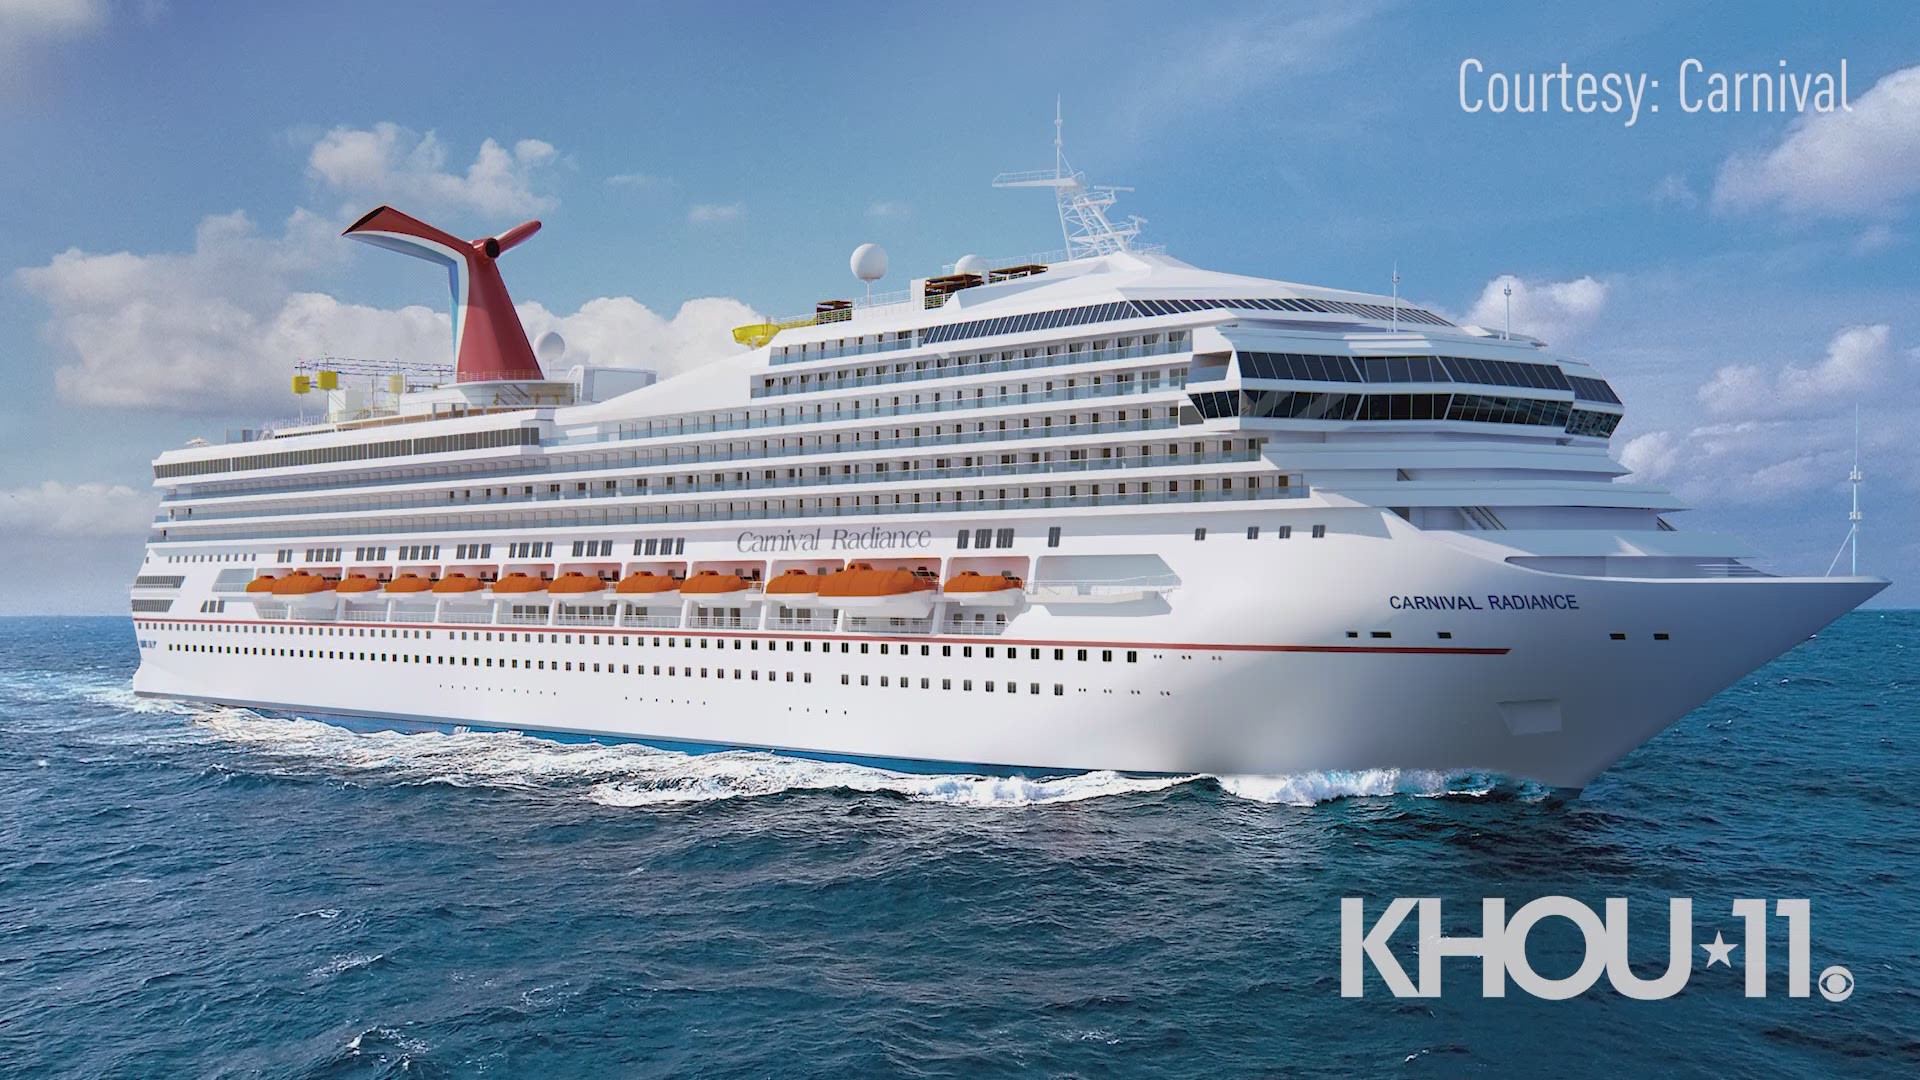 With these four ships, Carnival Cruise Line will carry an estimated 900,000 guests annually from Galveston.